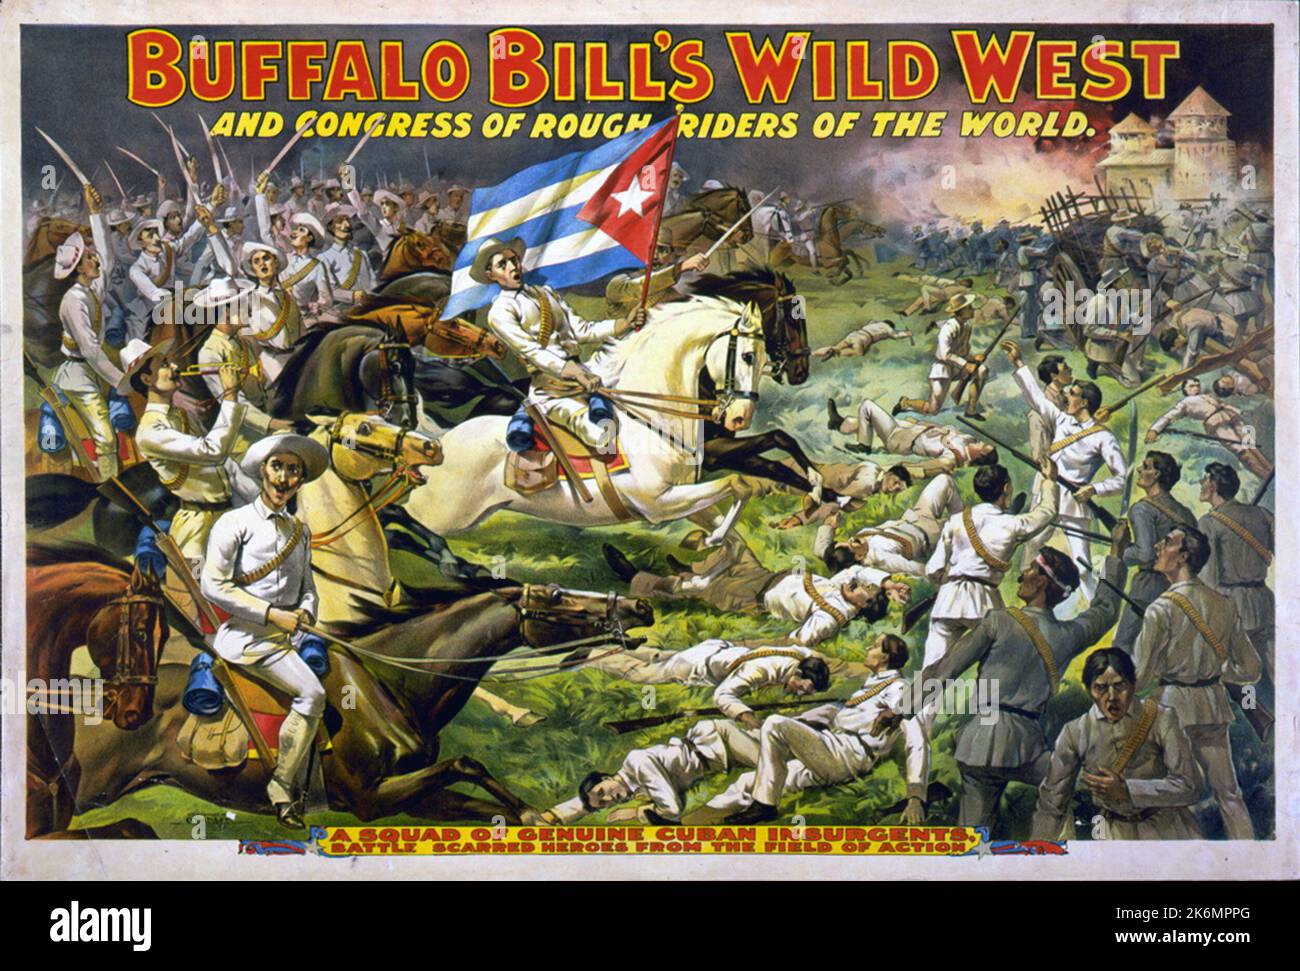 Buffalo Bill's Wild West and Congress of Rough Riders of the World, which was a stadium theatre show celebrating the exploits of Theodore Roosevelt and the Rough Riders during the Spanish American War c.1898 Stock Photo